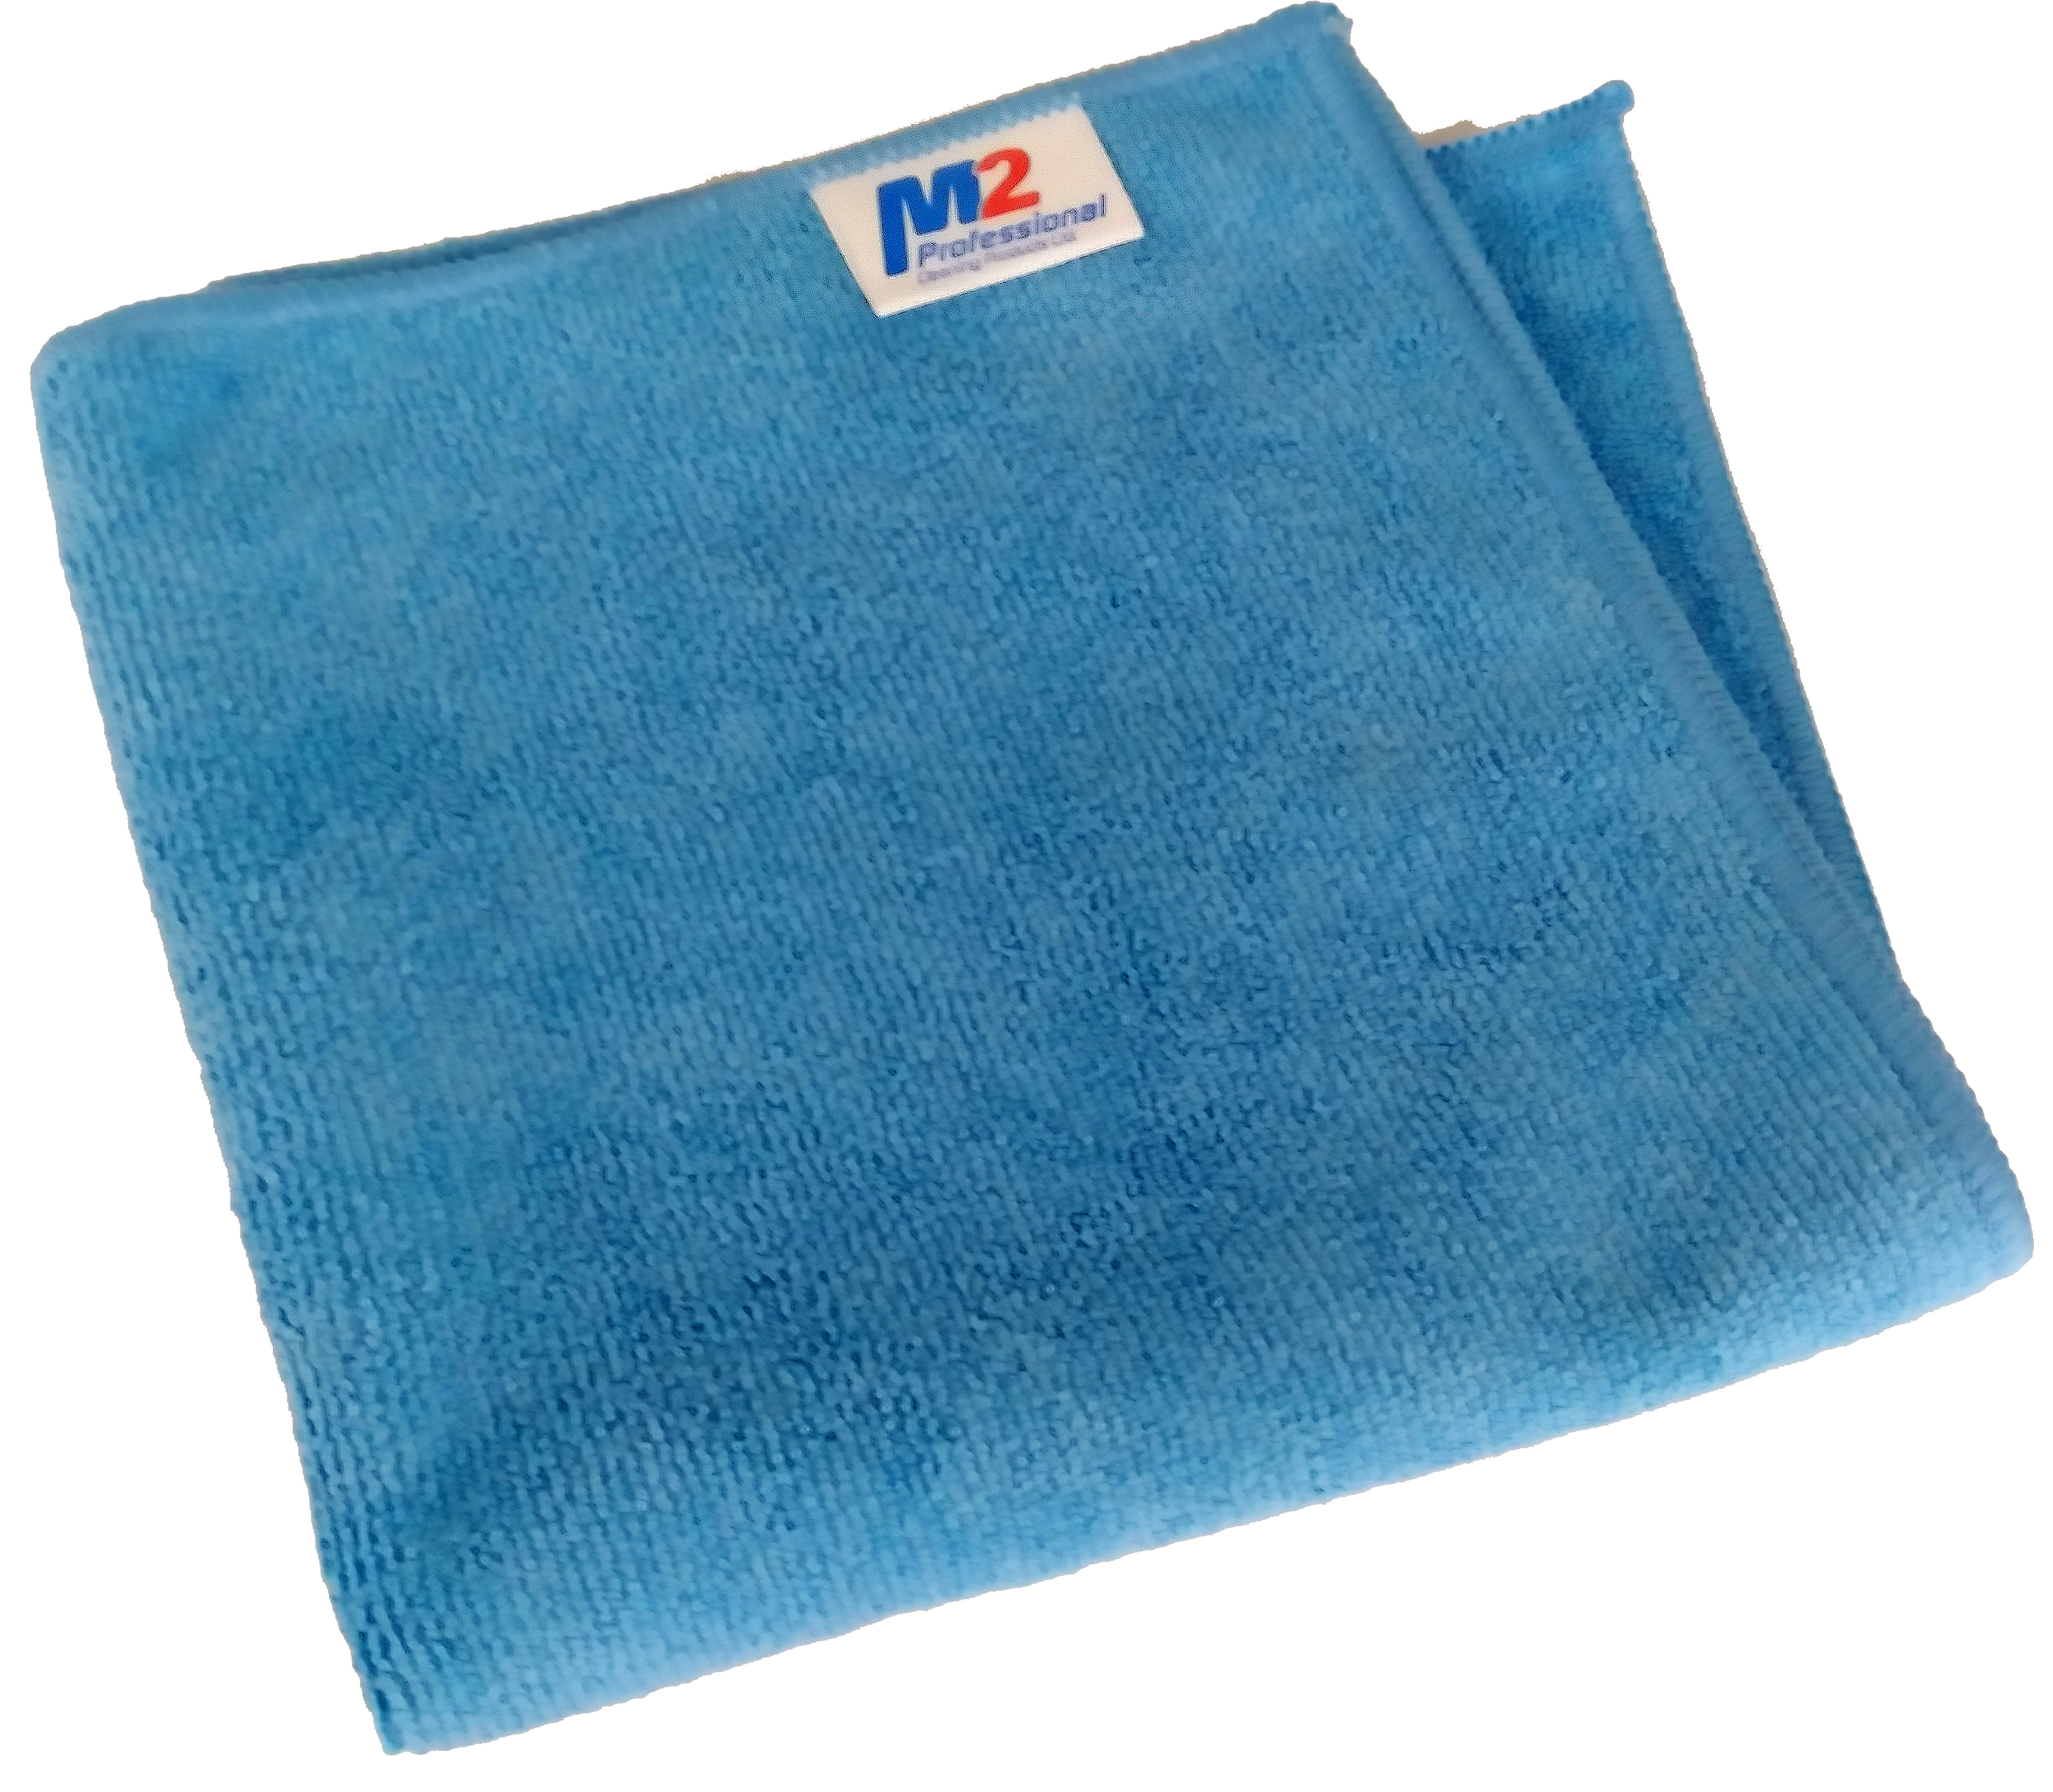 16"x16" M2® Woven Microfiber Cloth, All Purpose, Polyester Blend, Blue